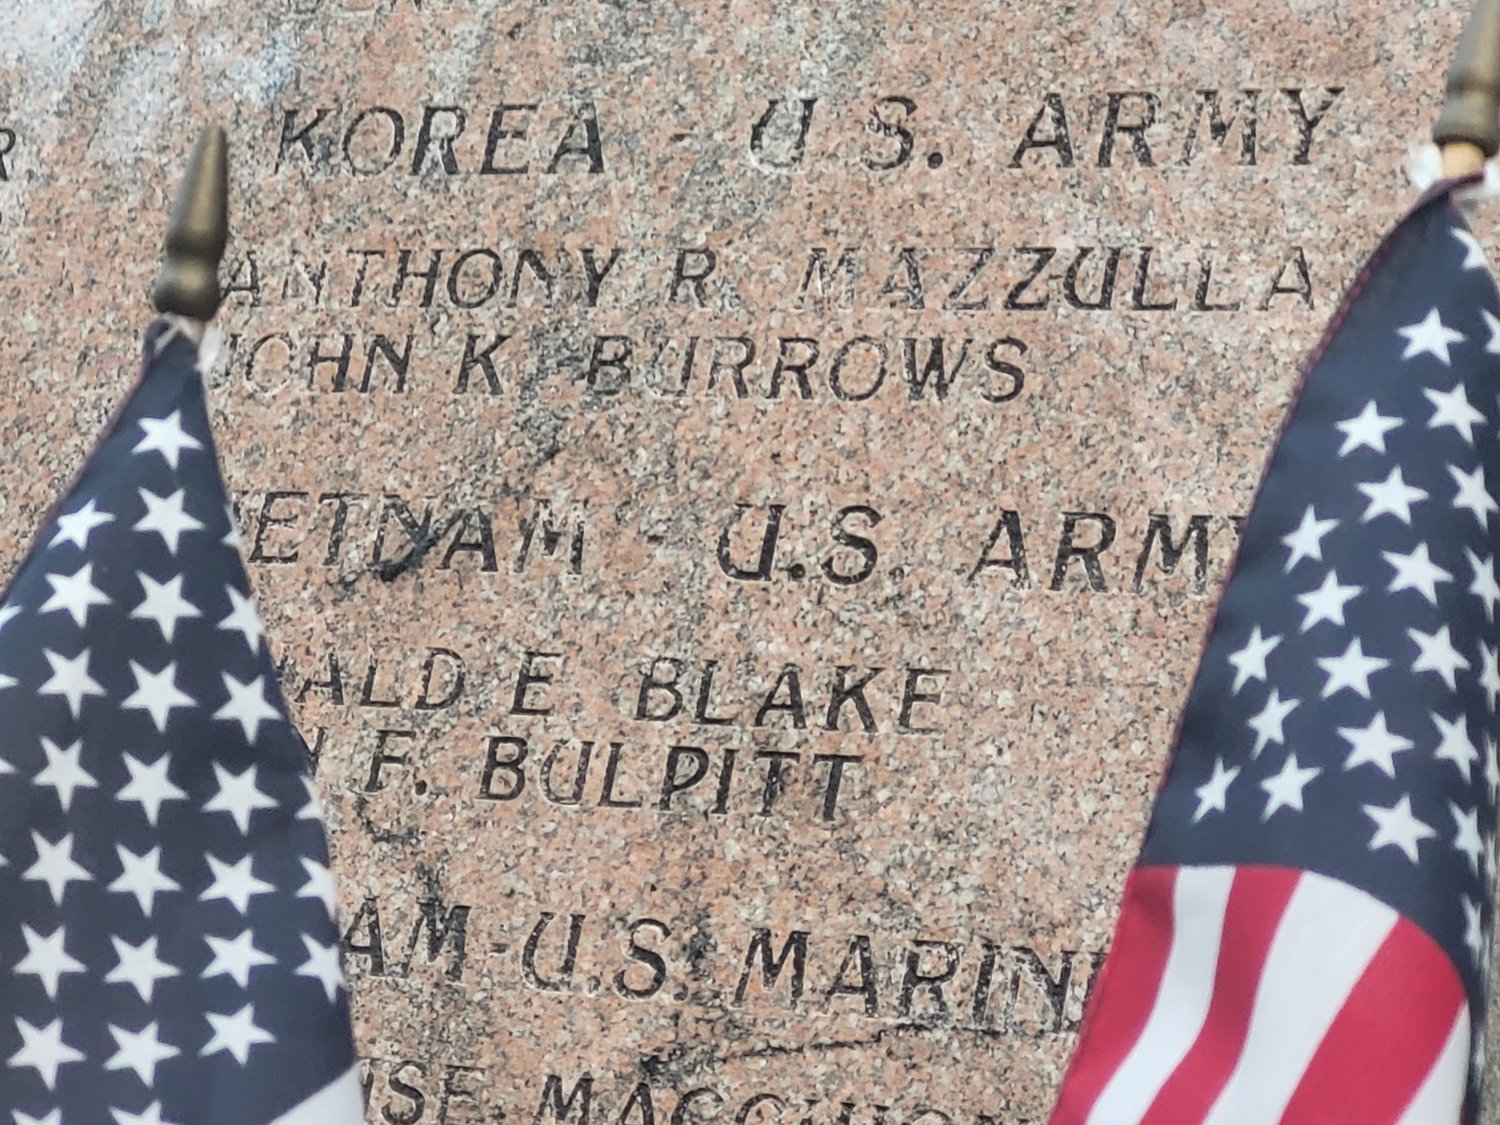 U.S. Army First Lt. Anthony R. Mazzulla’s name can be found at Johnston’s War Memorial Park on a stone marker remembering the town’s soldiers who paid the ultimate sacrifice.